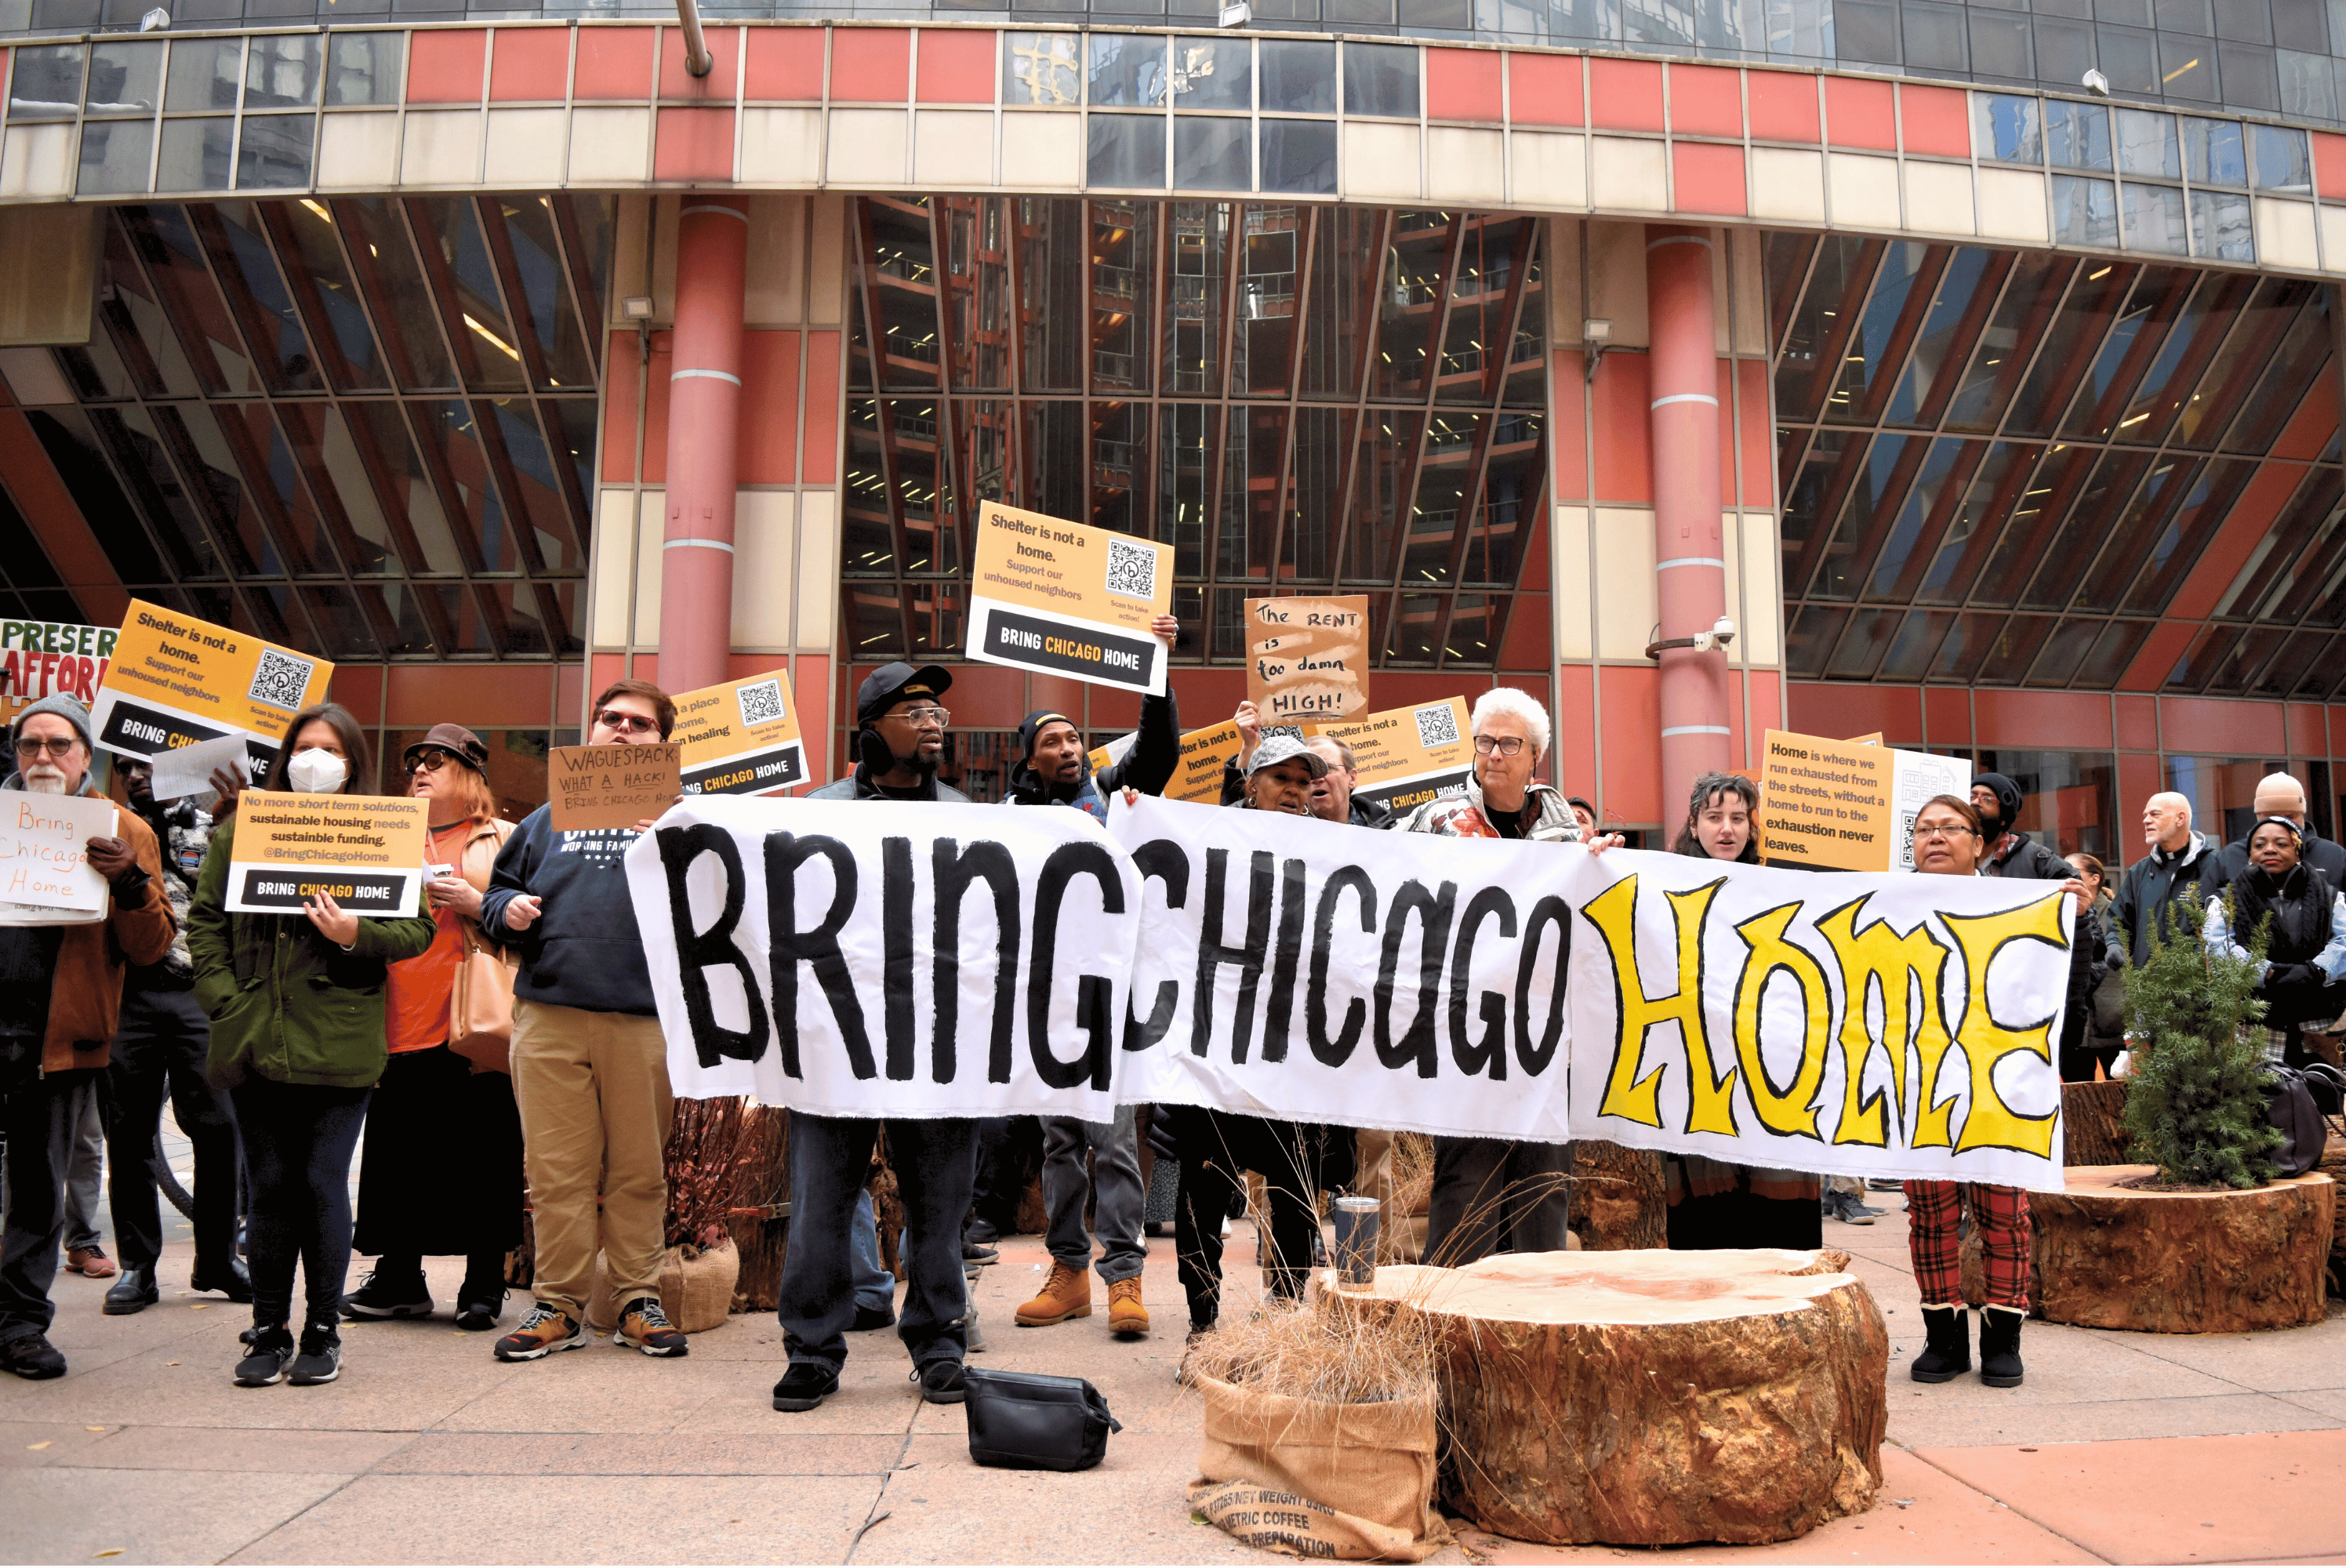 A group of protestors holds a banner reading "Bring Chicago Home"